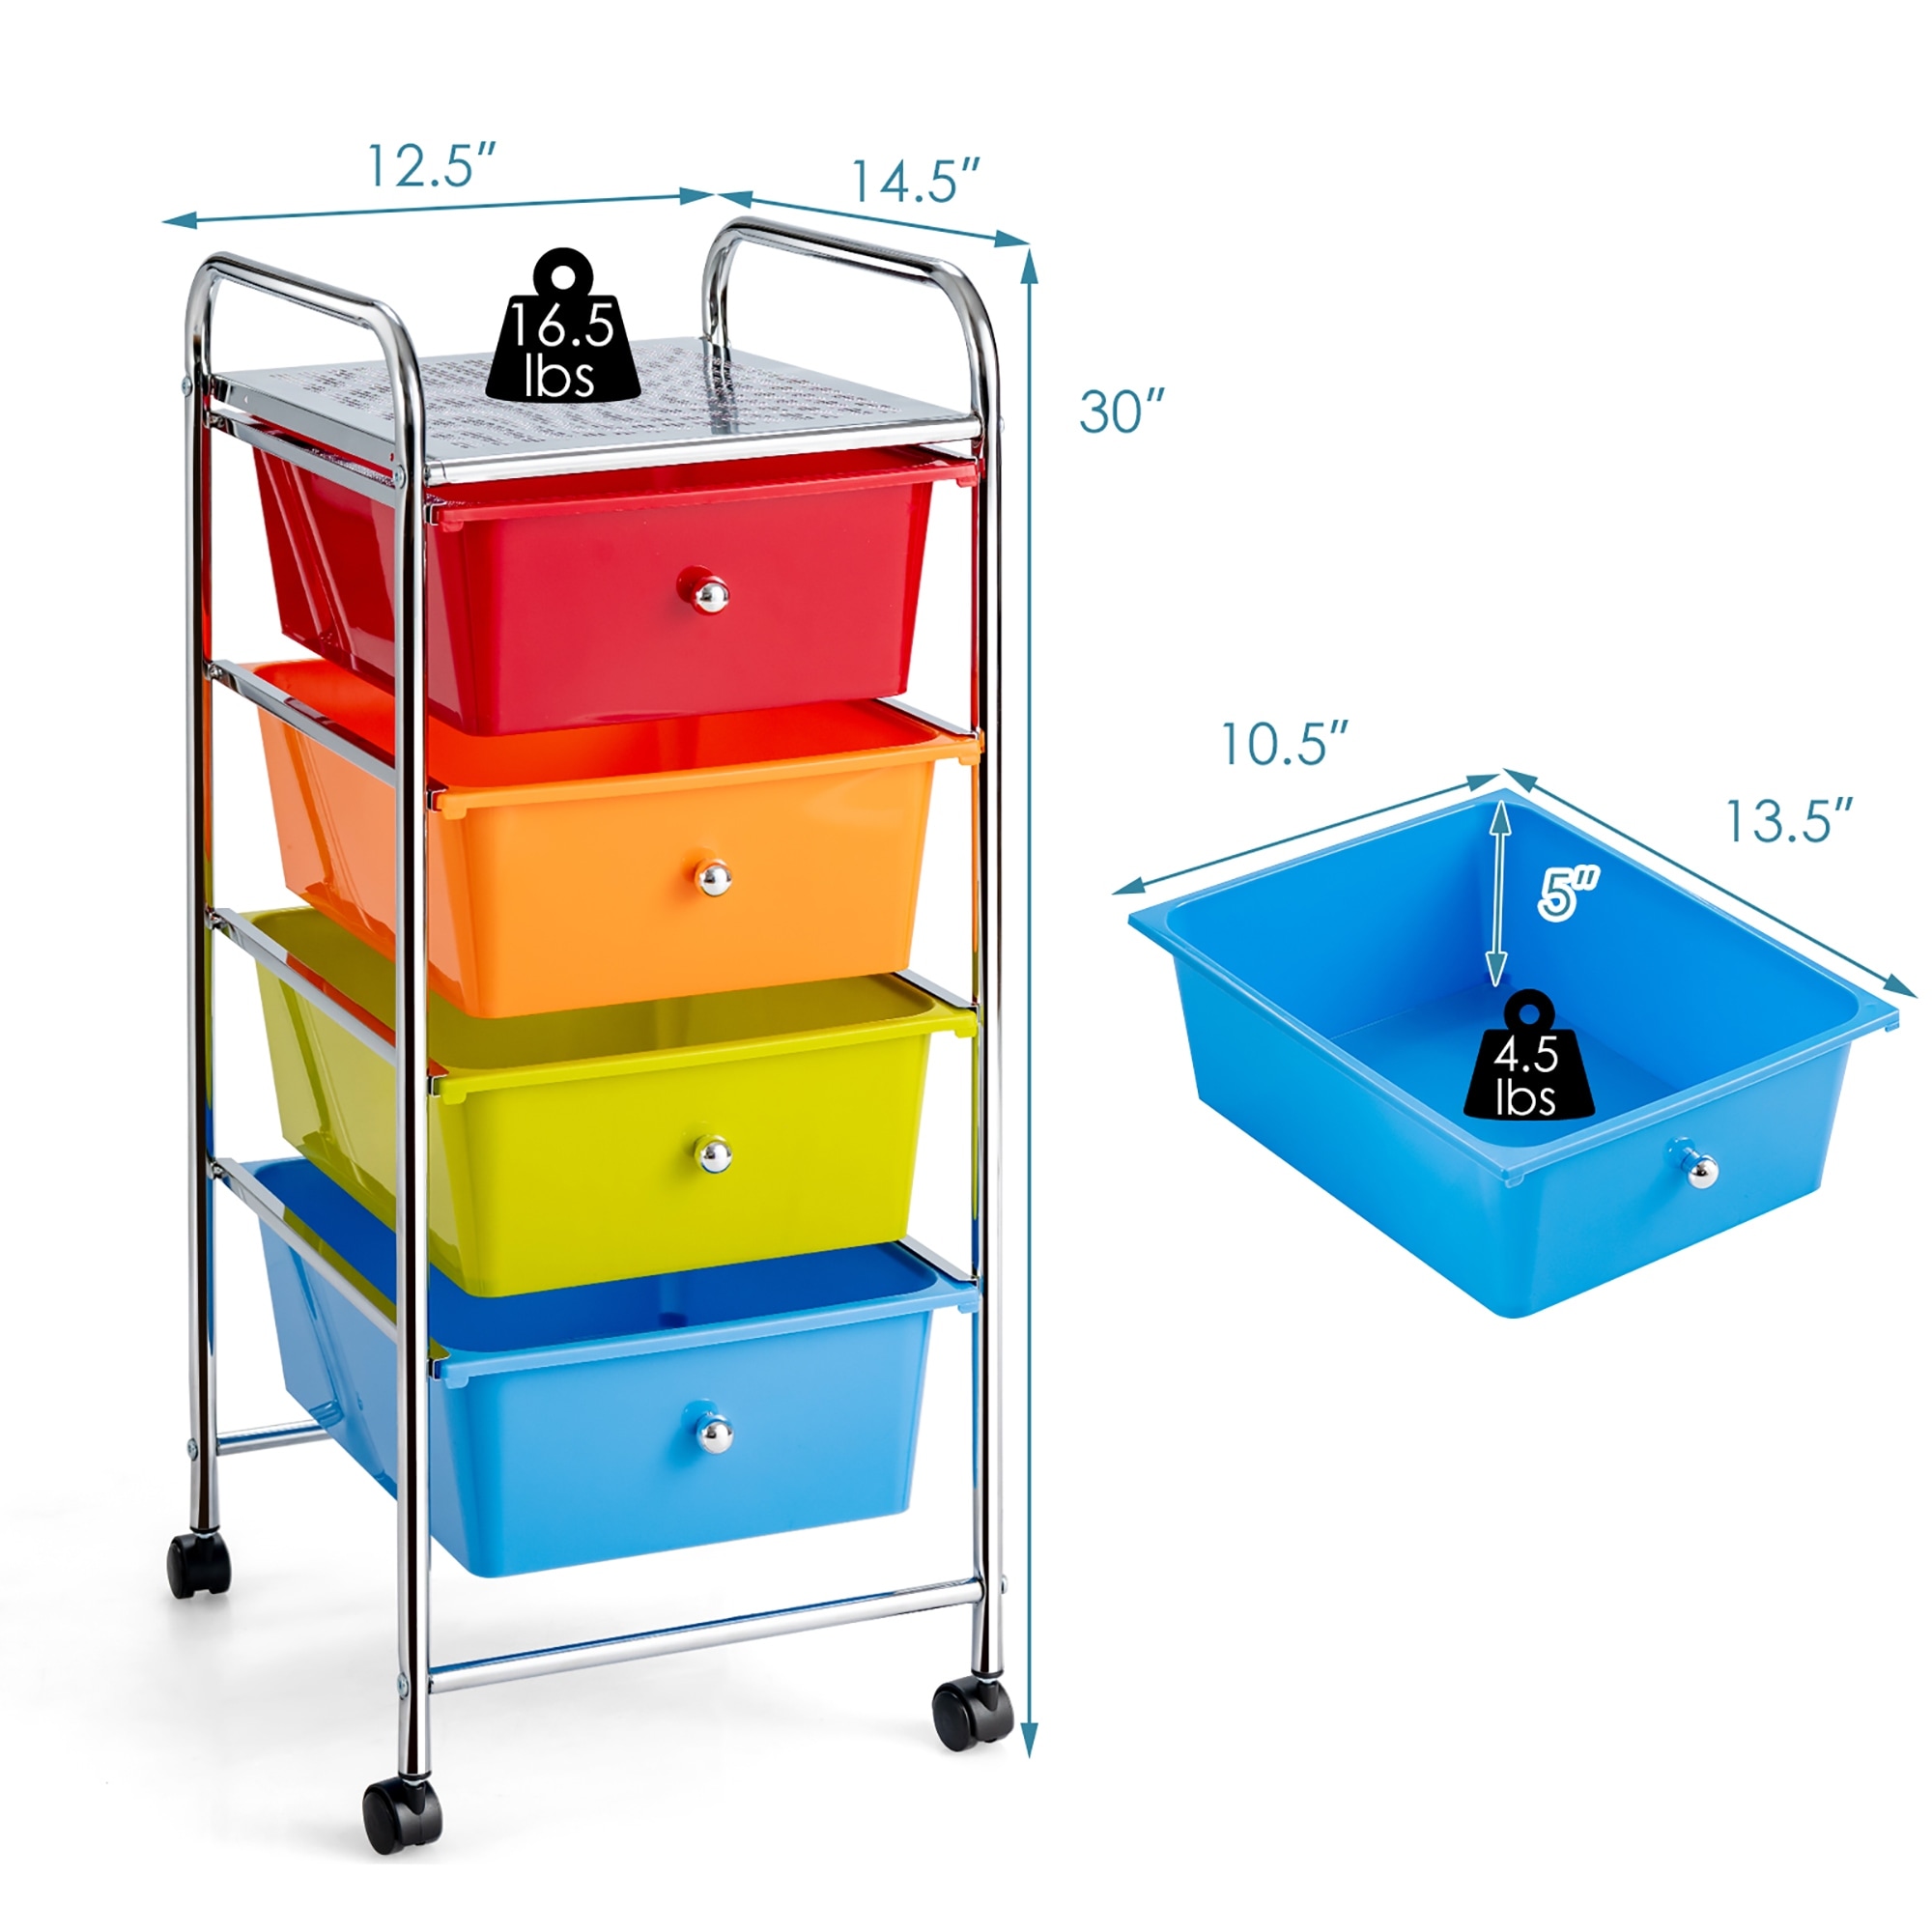 https://ak1.ostkcdn.com/images/products/is/images/direct/aa96fac49391e4276a06a183738e9dd5599c3bfb/Costway-4-Drawer-Cart-Storage-Bin-Organizer-Rolling-w-Plastic-Drawers.jpg